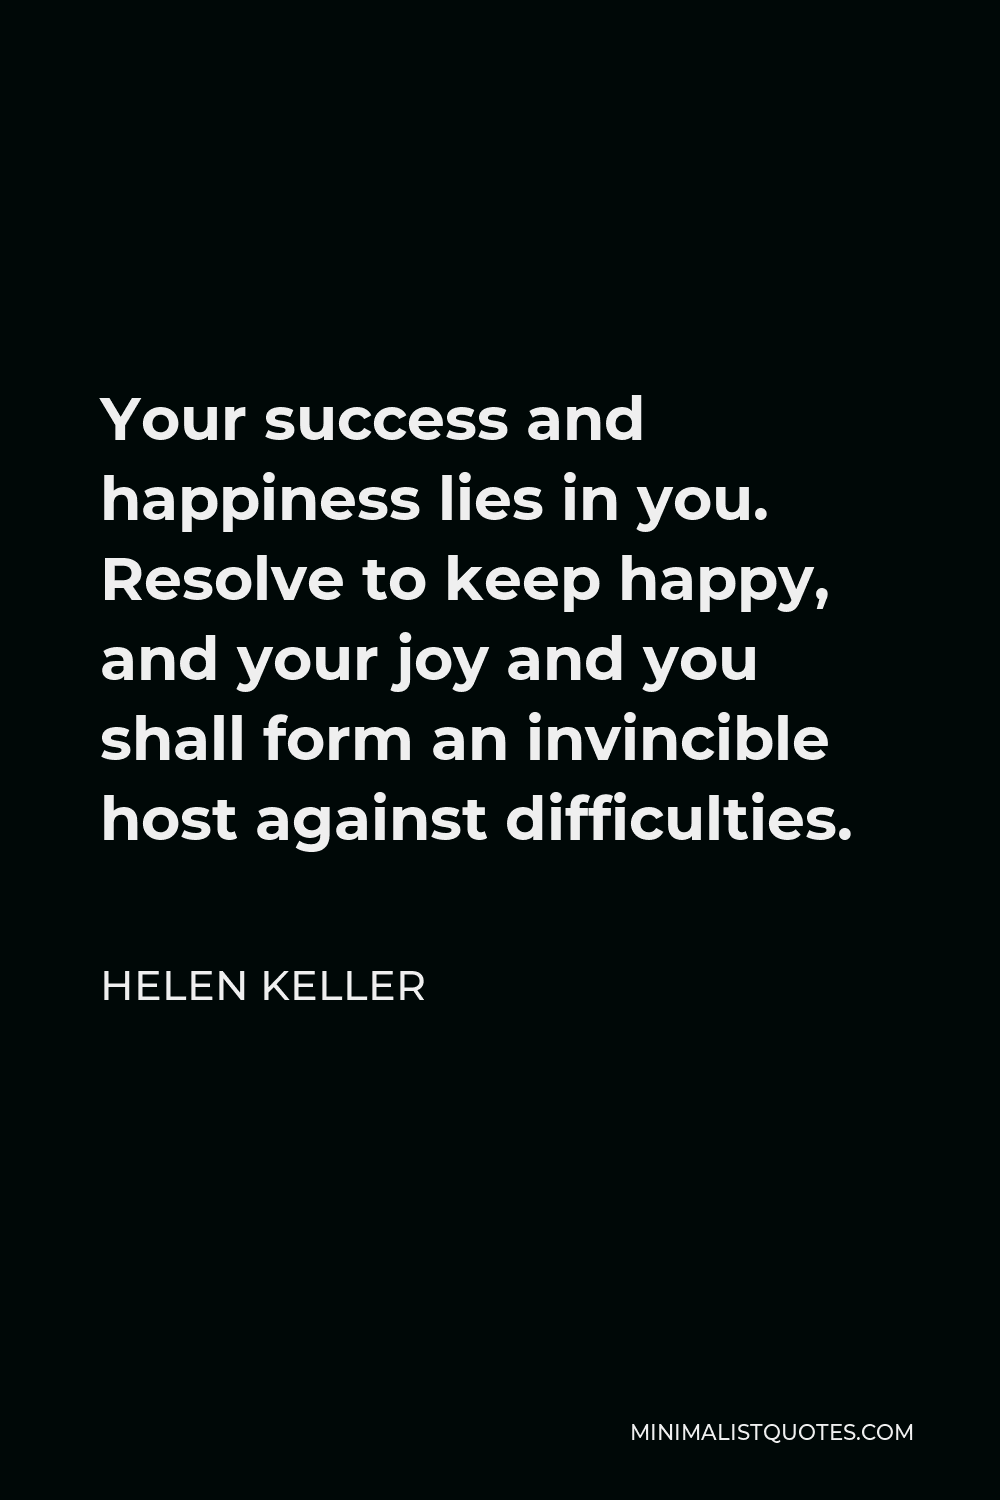 Helen Keller Quote - Your success and happiness lies in you. Resolve to keep happy, and your joy and you shall form an invincible host against difficulties.